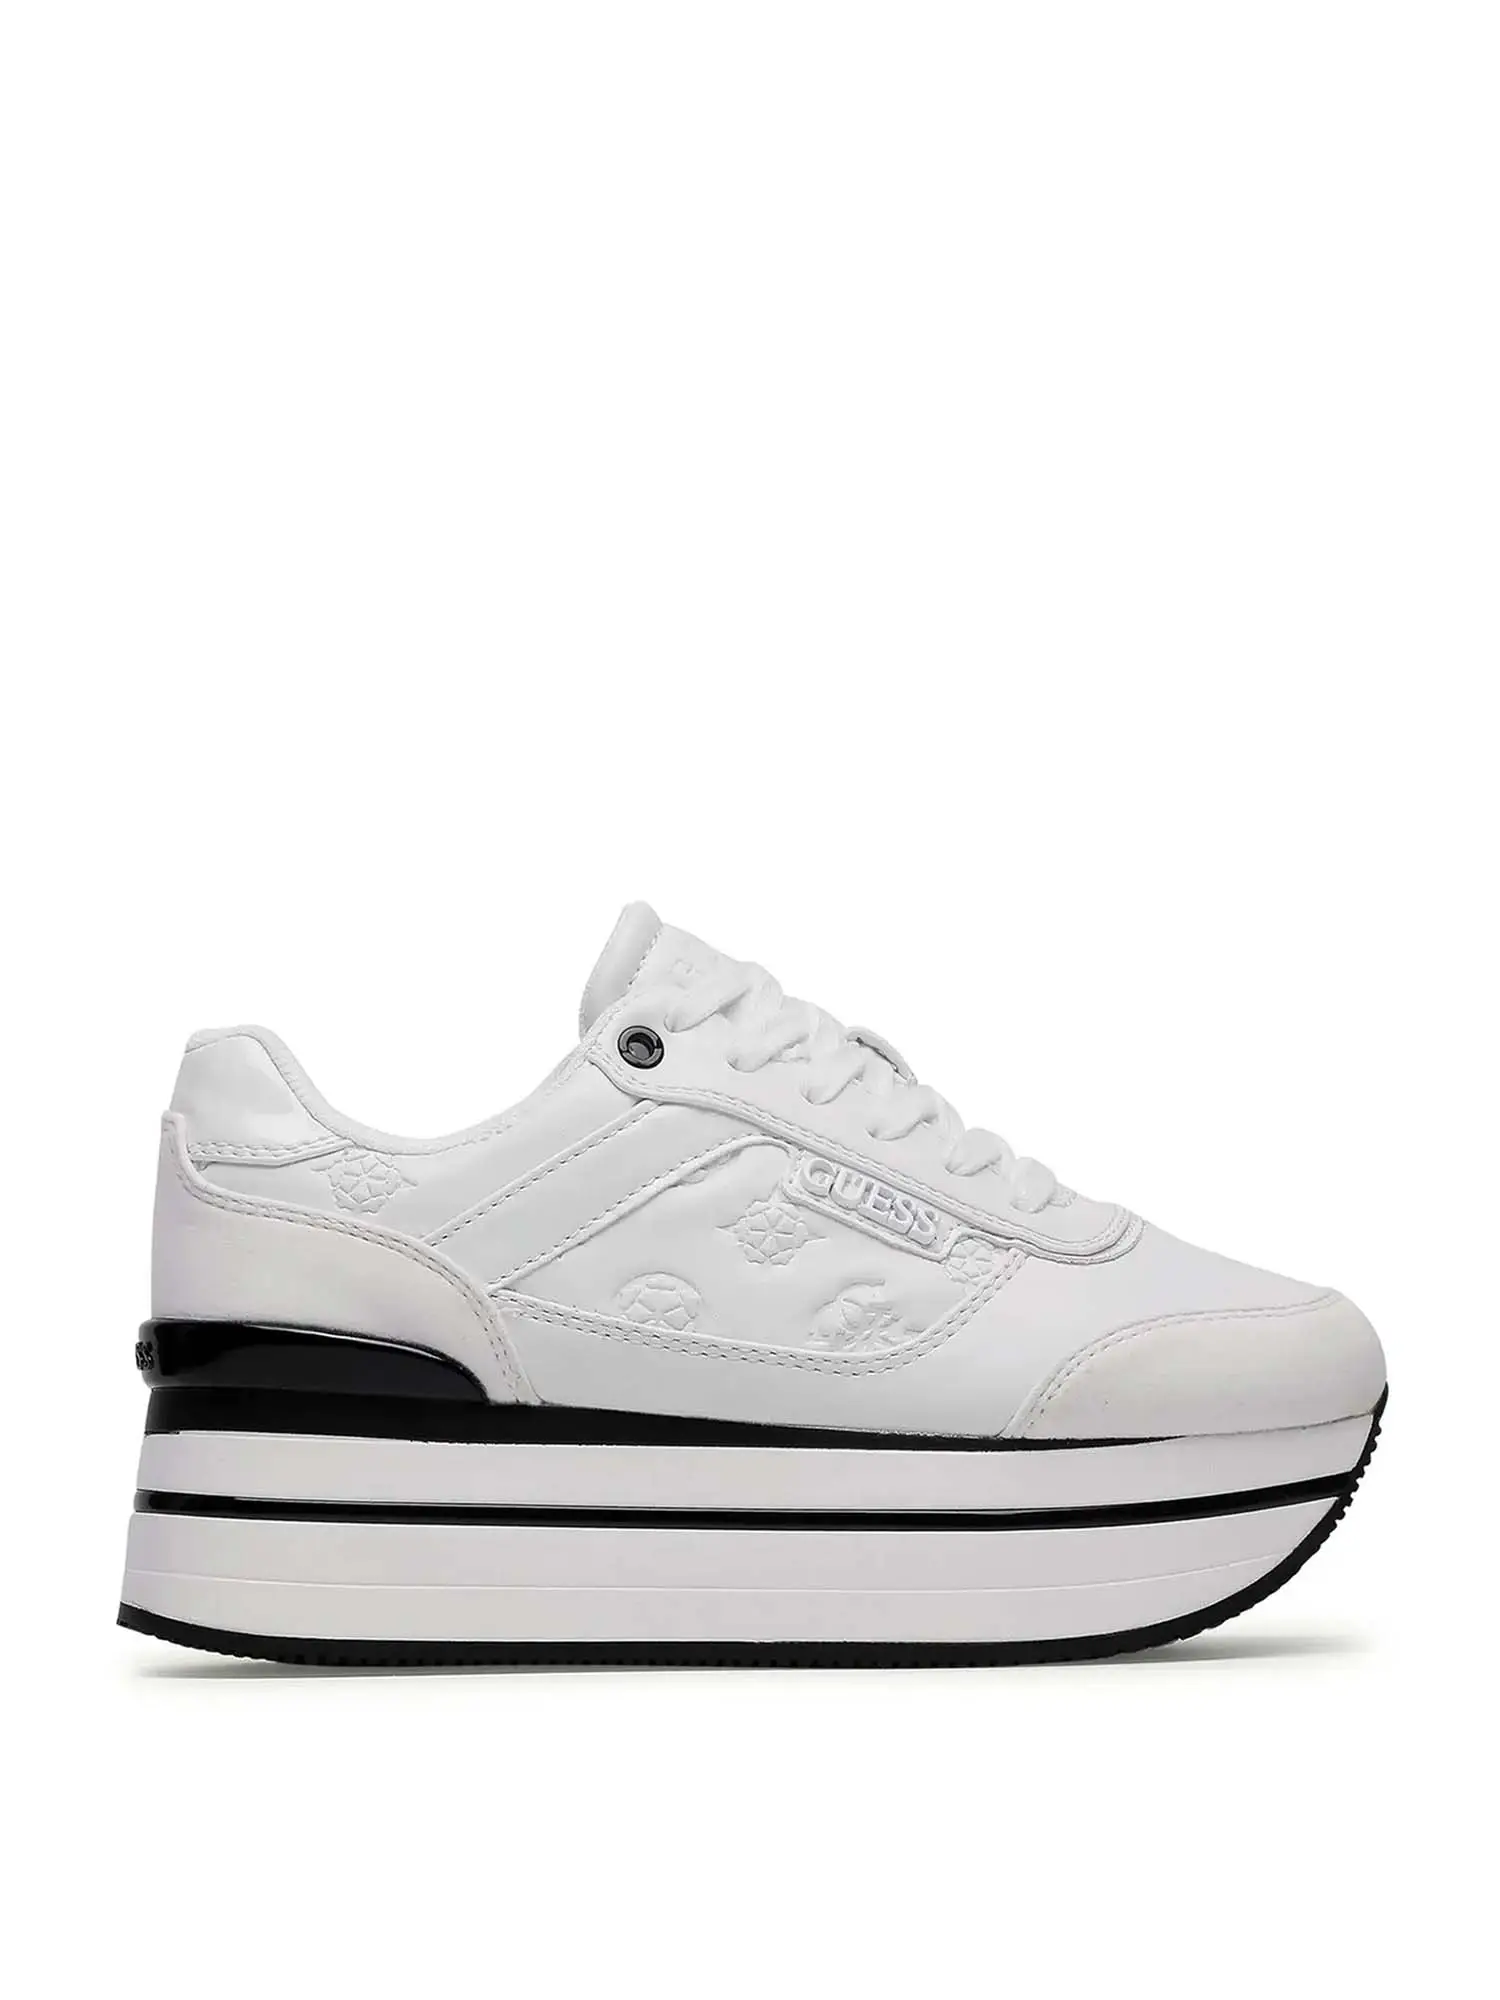 SNEAKERS DONNA - GUESS - FL5HNS PEL12 - BIANCO, 39